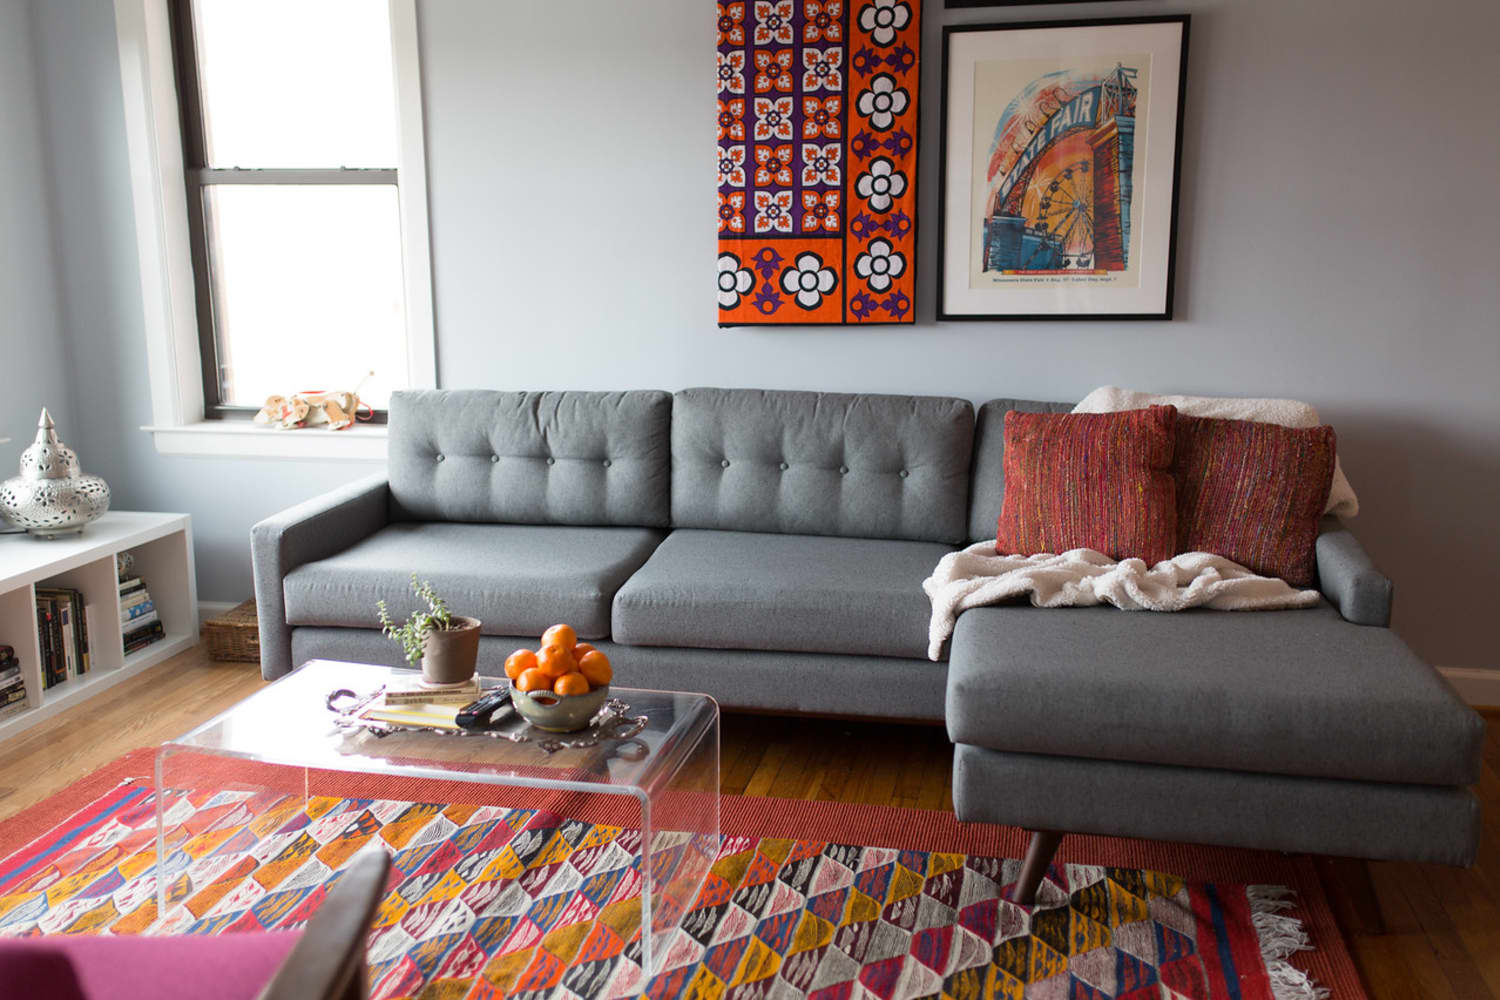 A Couple’s First Apartment Together Full of Travel Finds & Blended Style